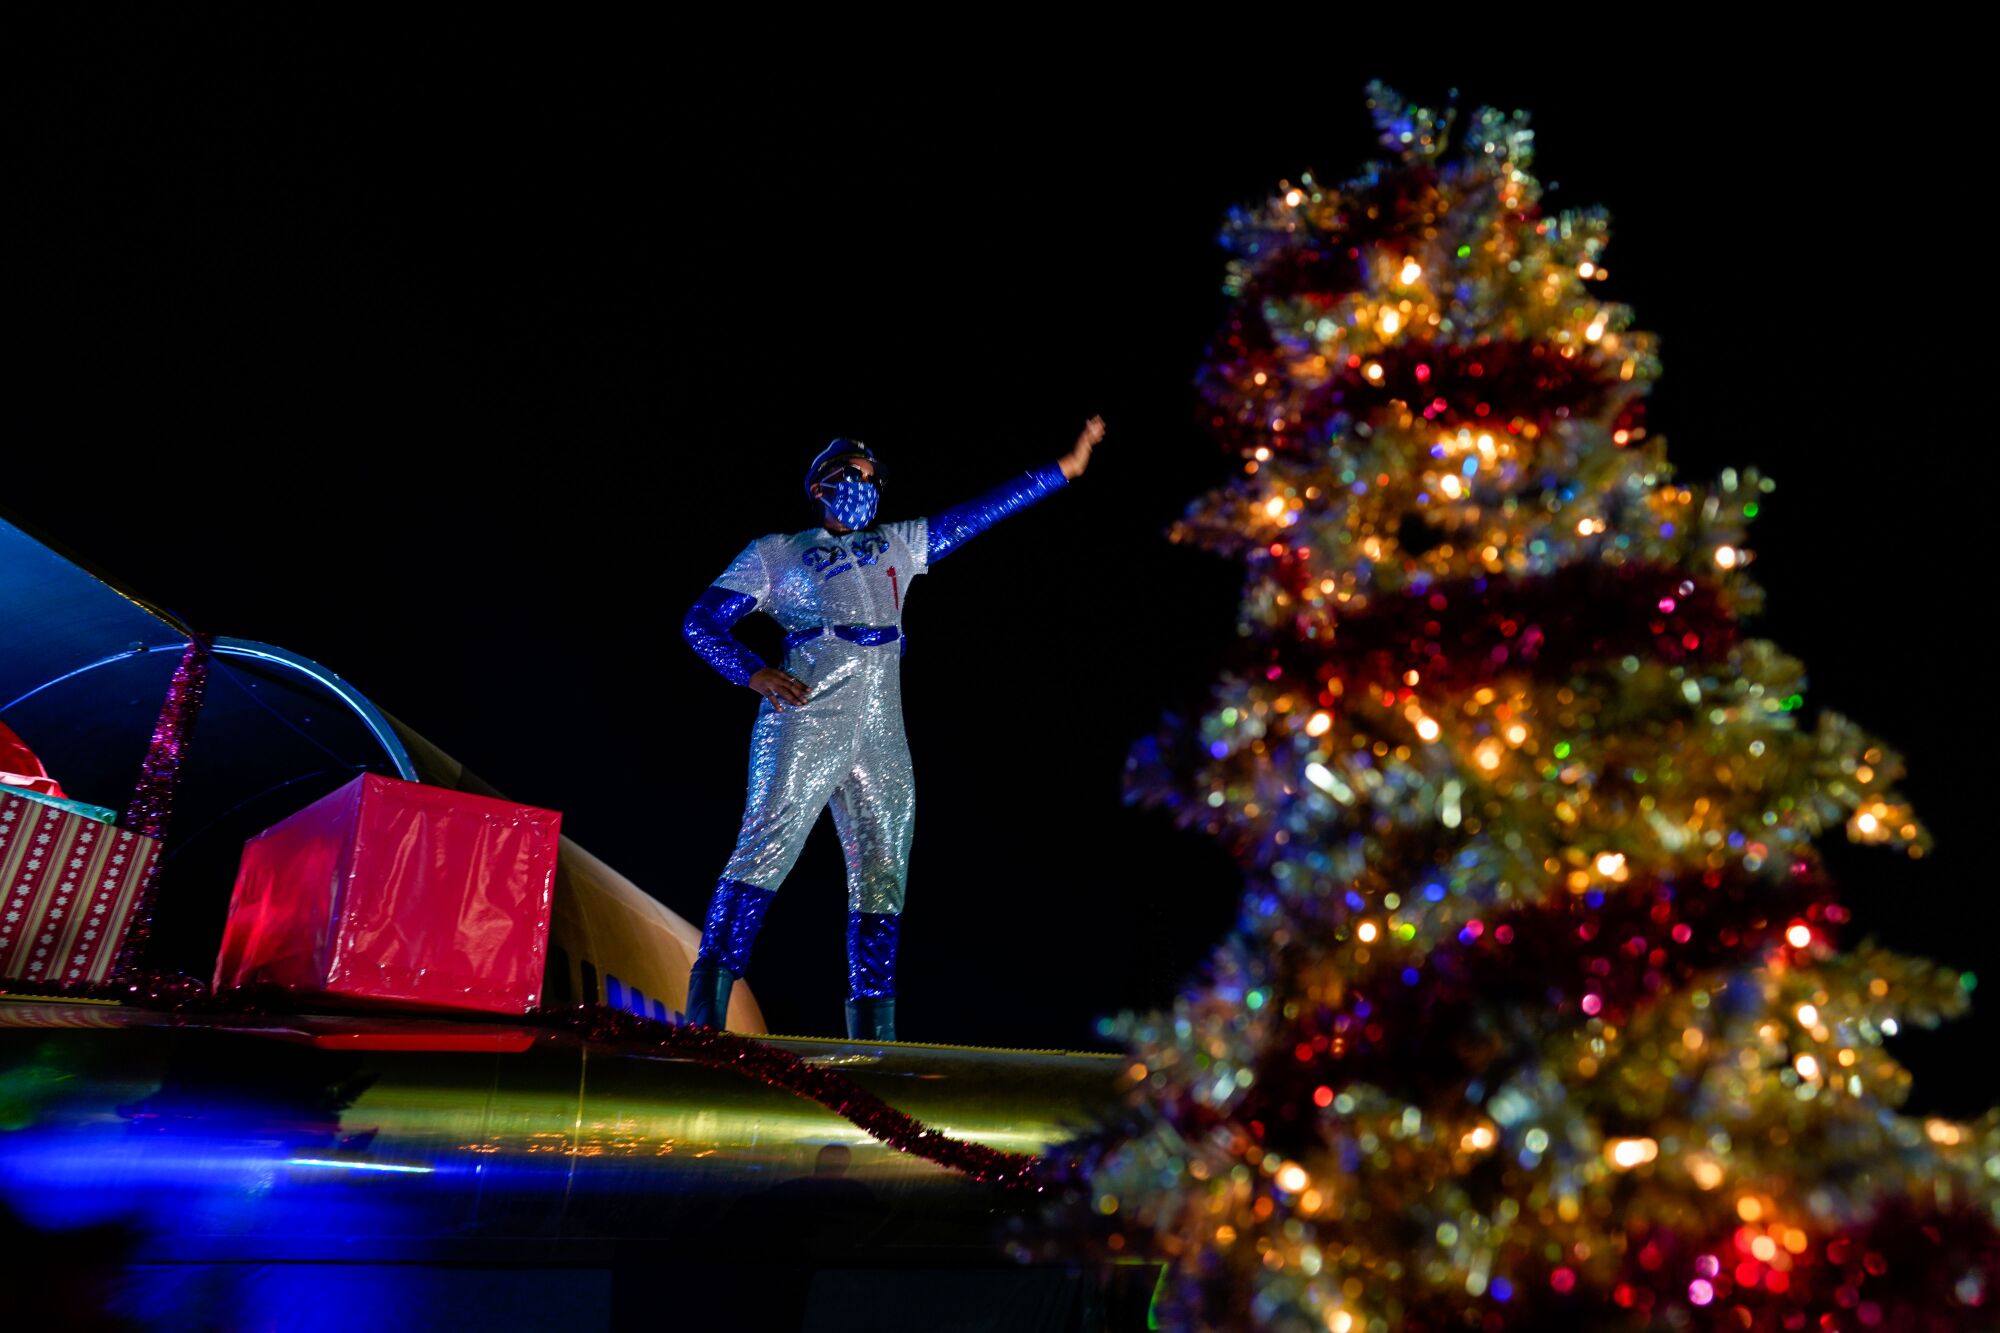 A performer decked out in a Christmas themed dodger costume dances and waves at cars